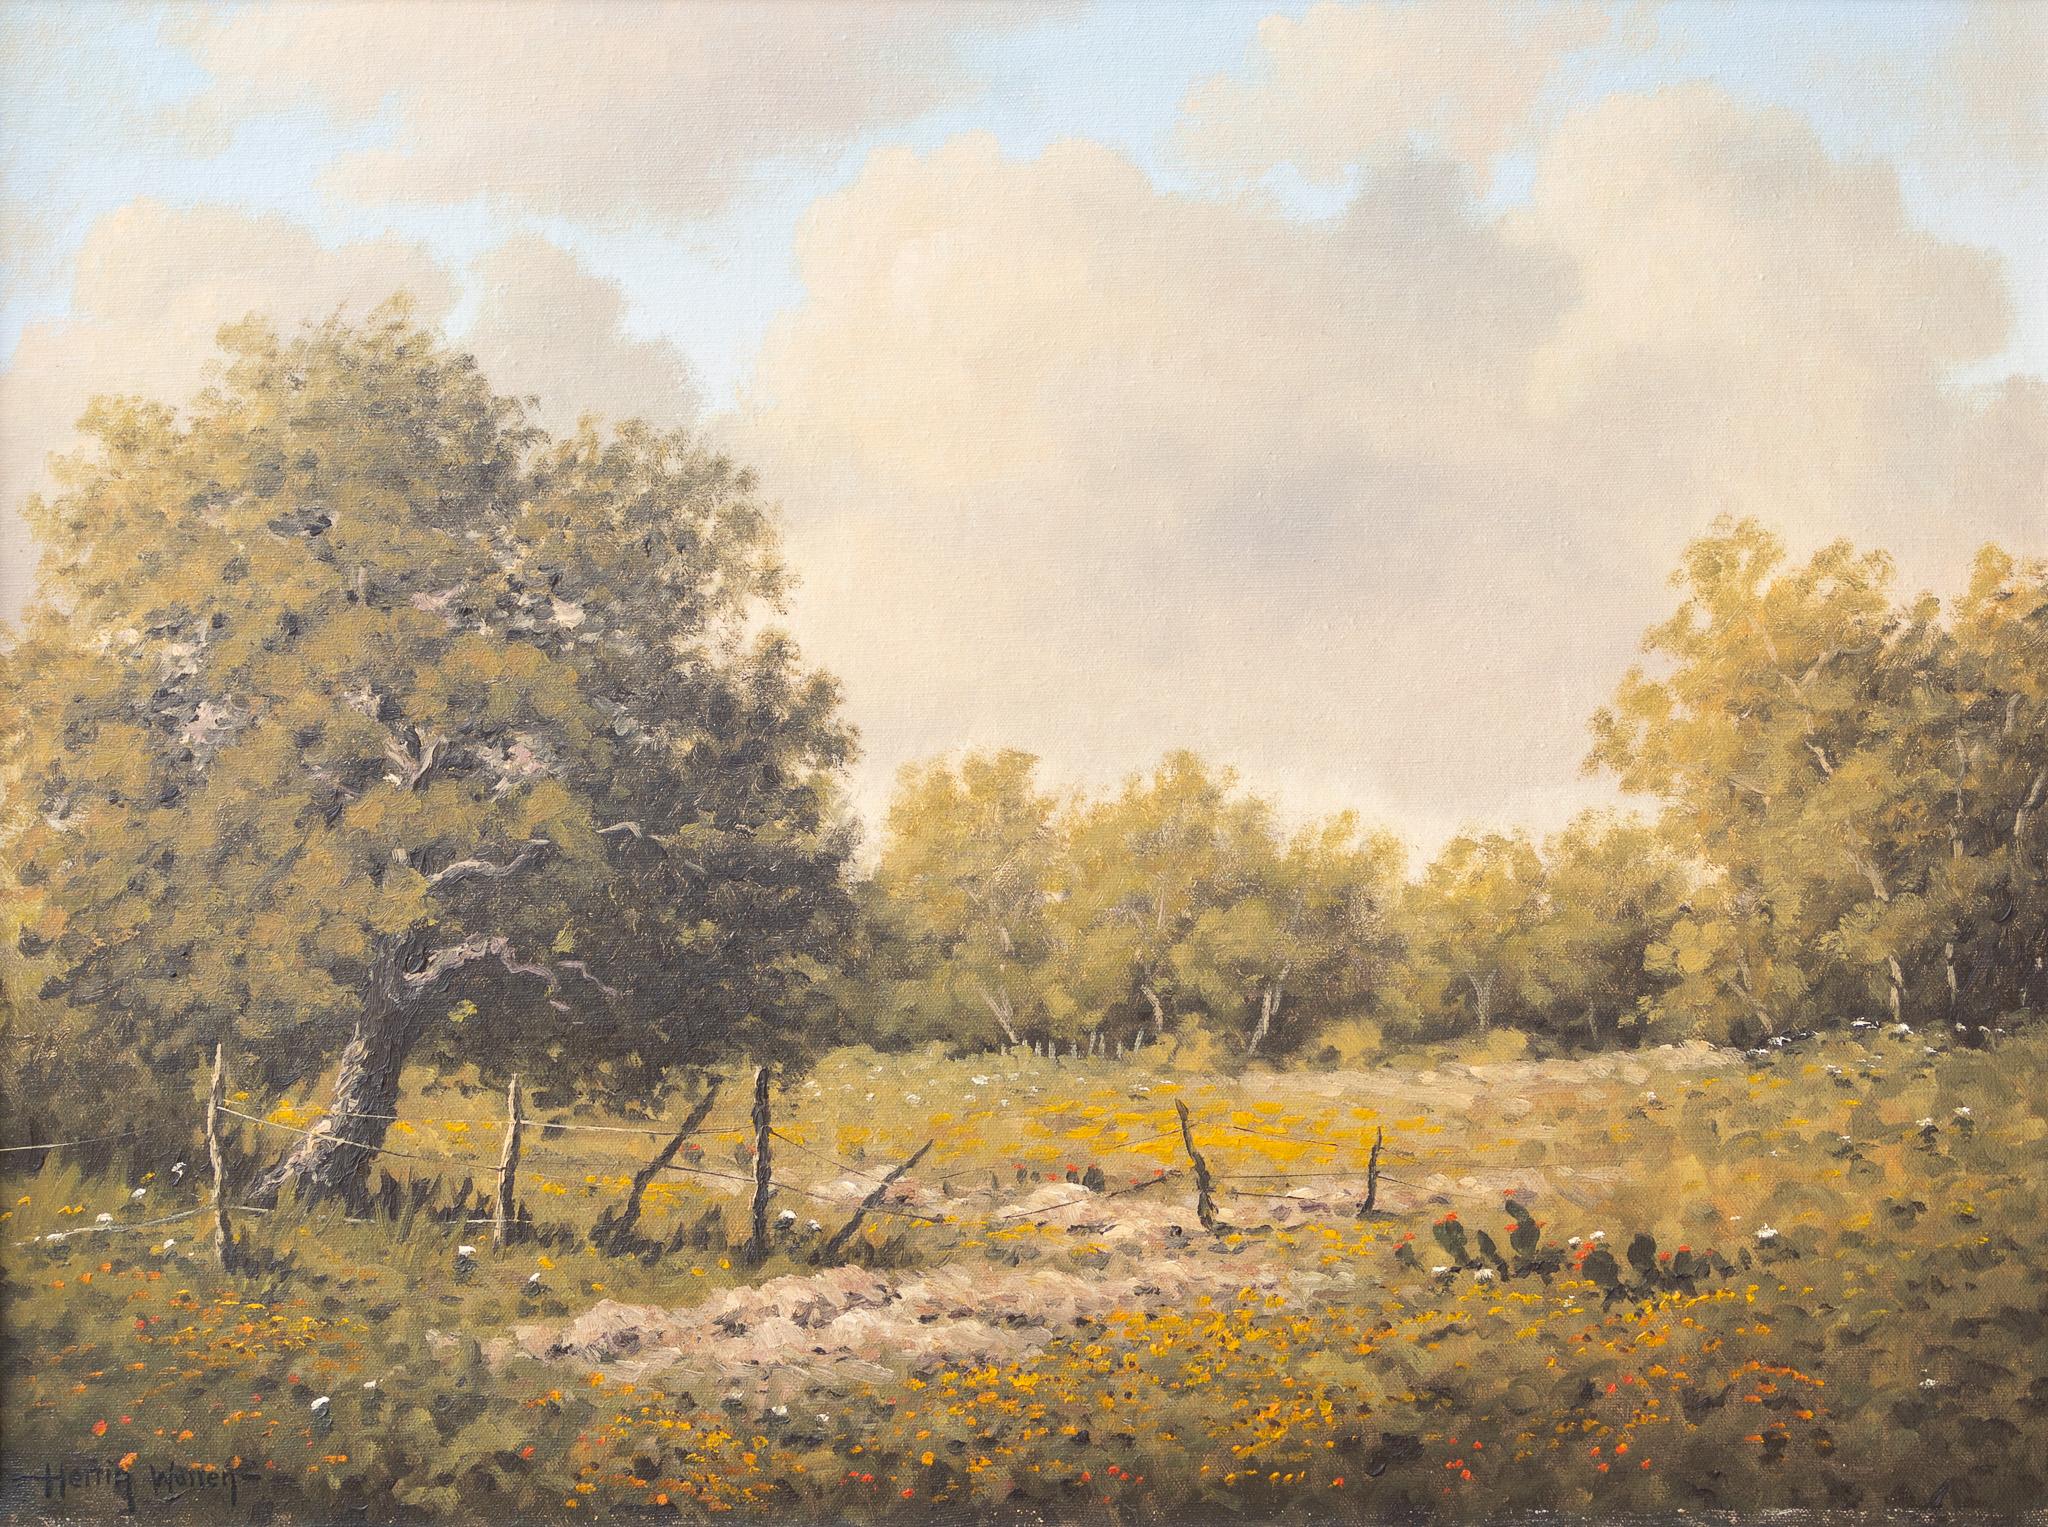 Don Warren Landscape Painting - Texas Landscape with Yellow Wildflowers